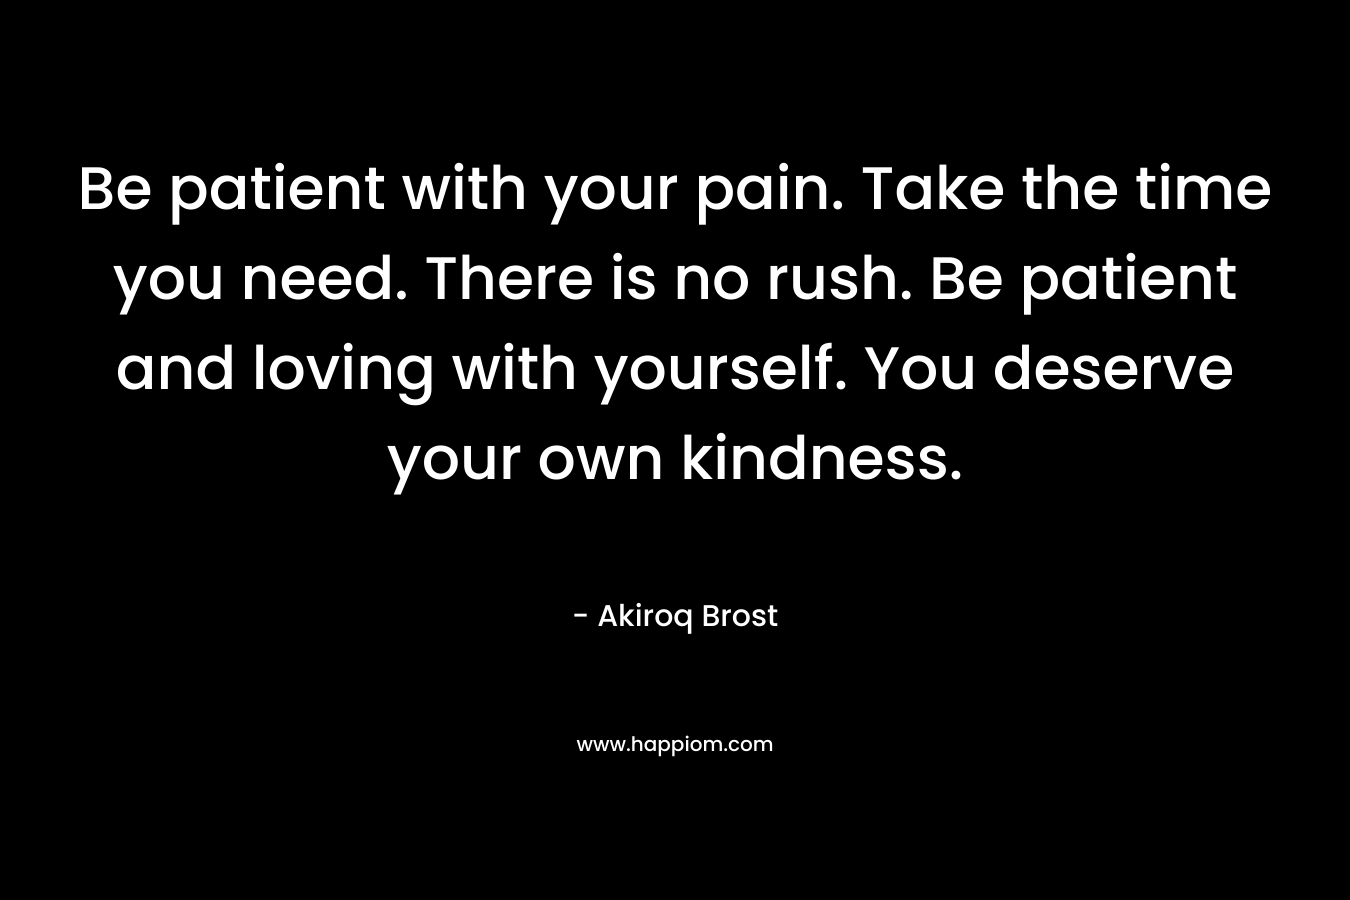 Be patient with your pain. Take the time you need. There is no rush. Be patient and loving with yourself. You deserve your own kindness.